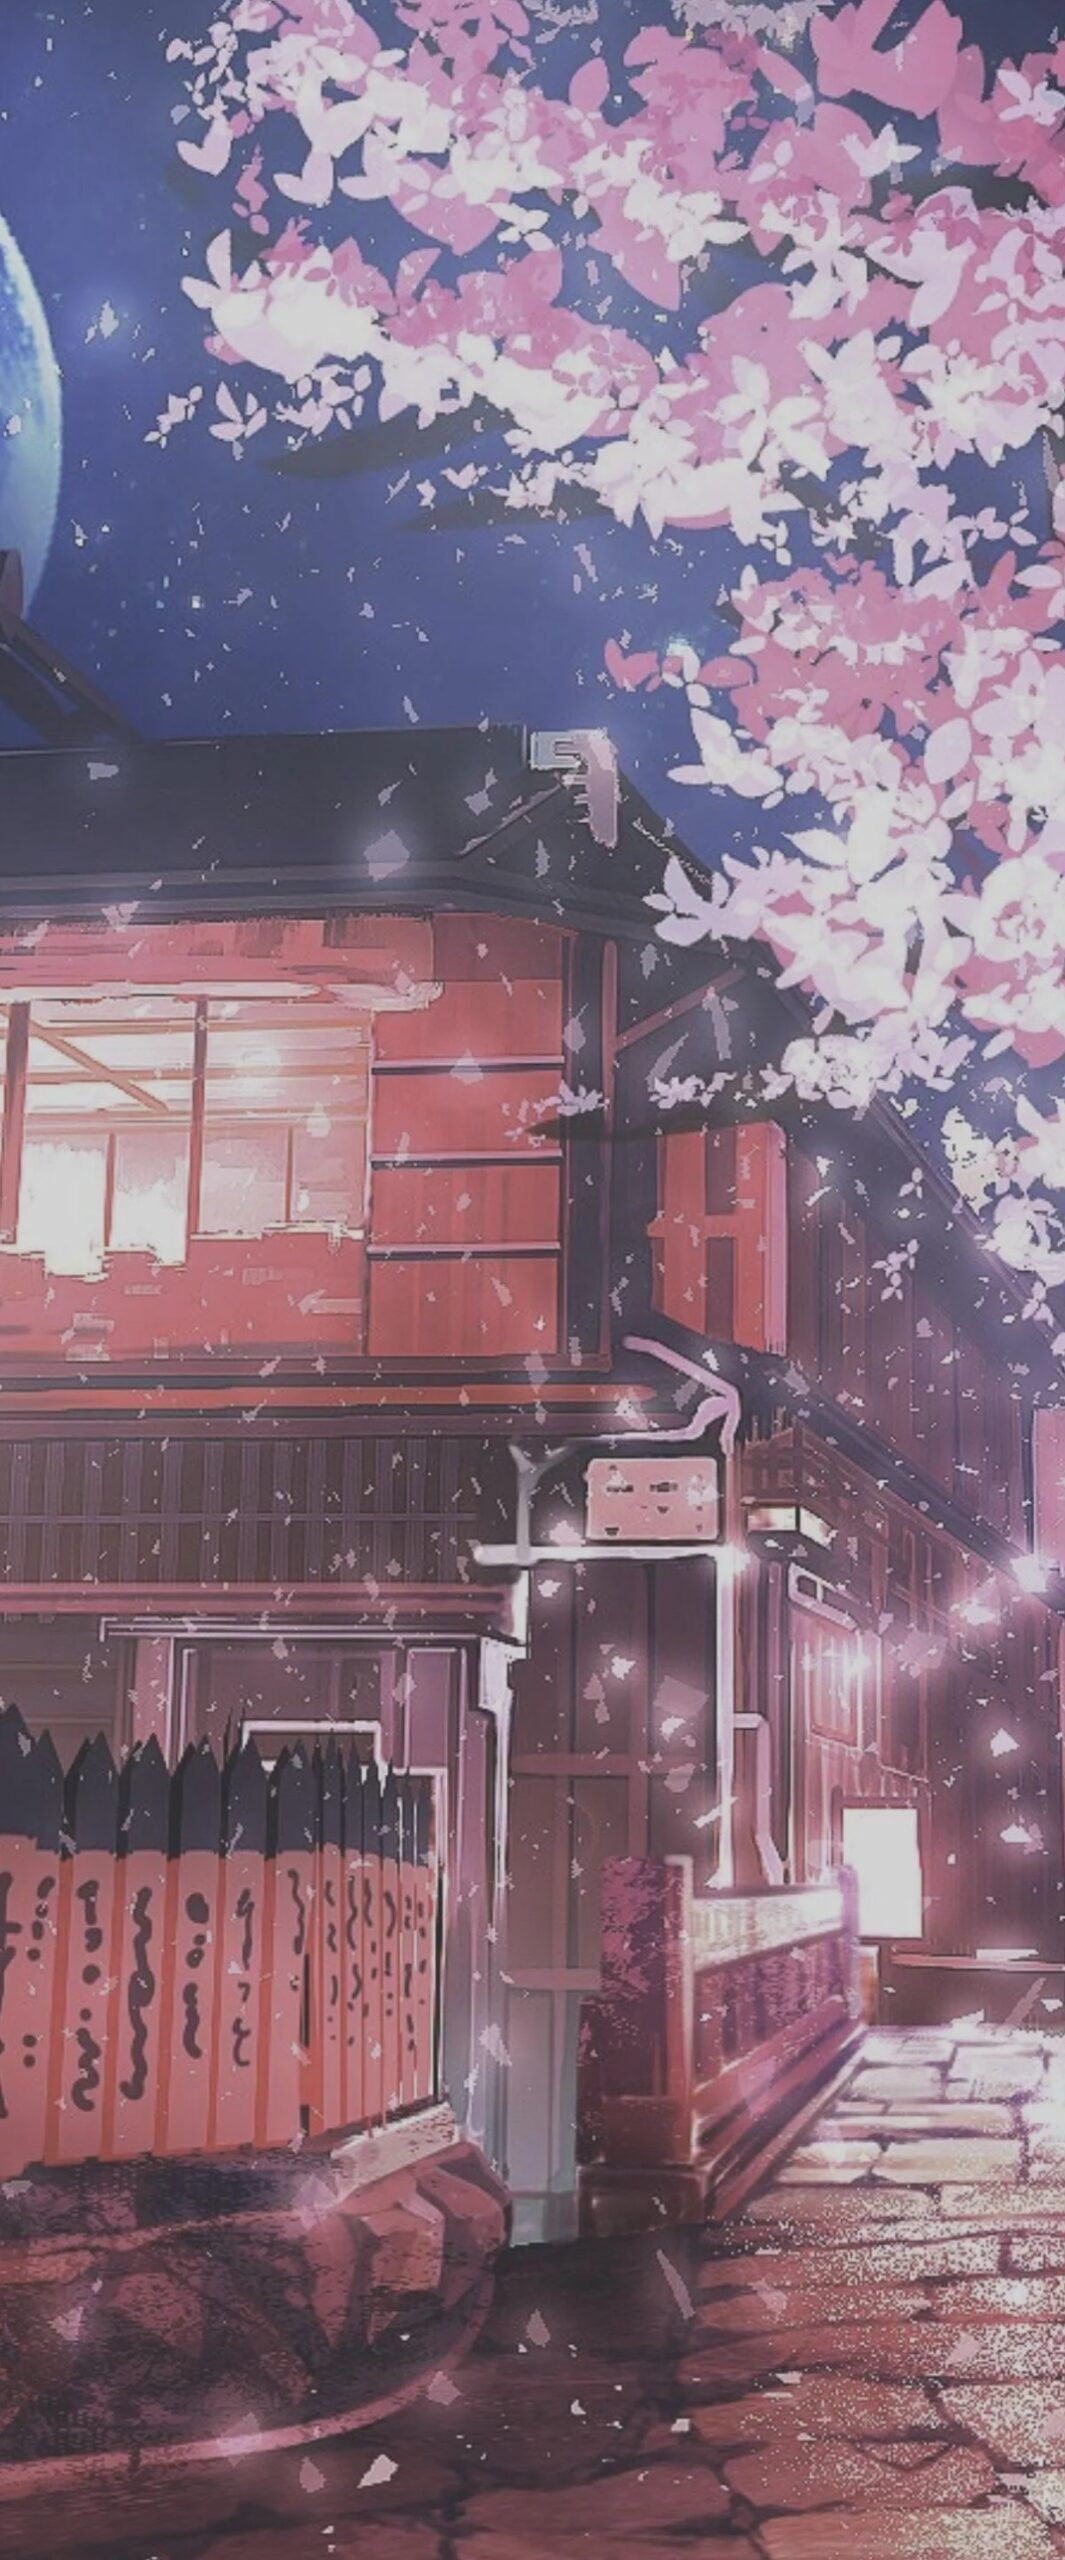 Aesthetic anime houses with cherry blossoms in the night - Scenery, anime landscape